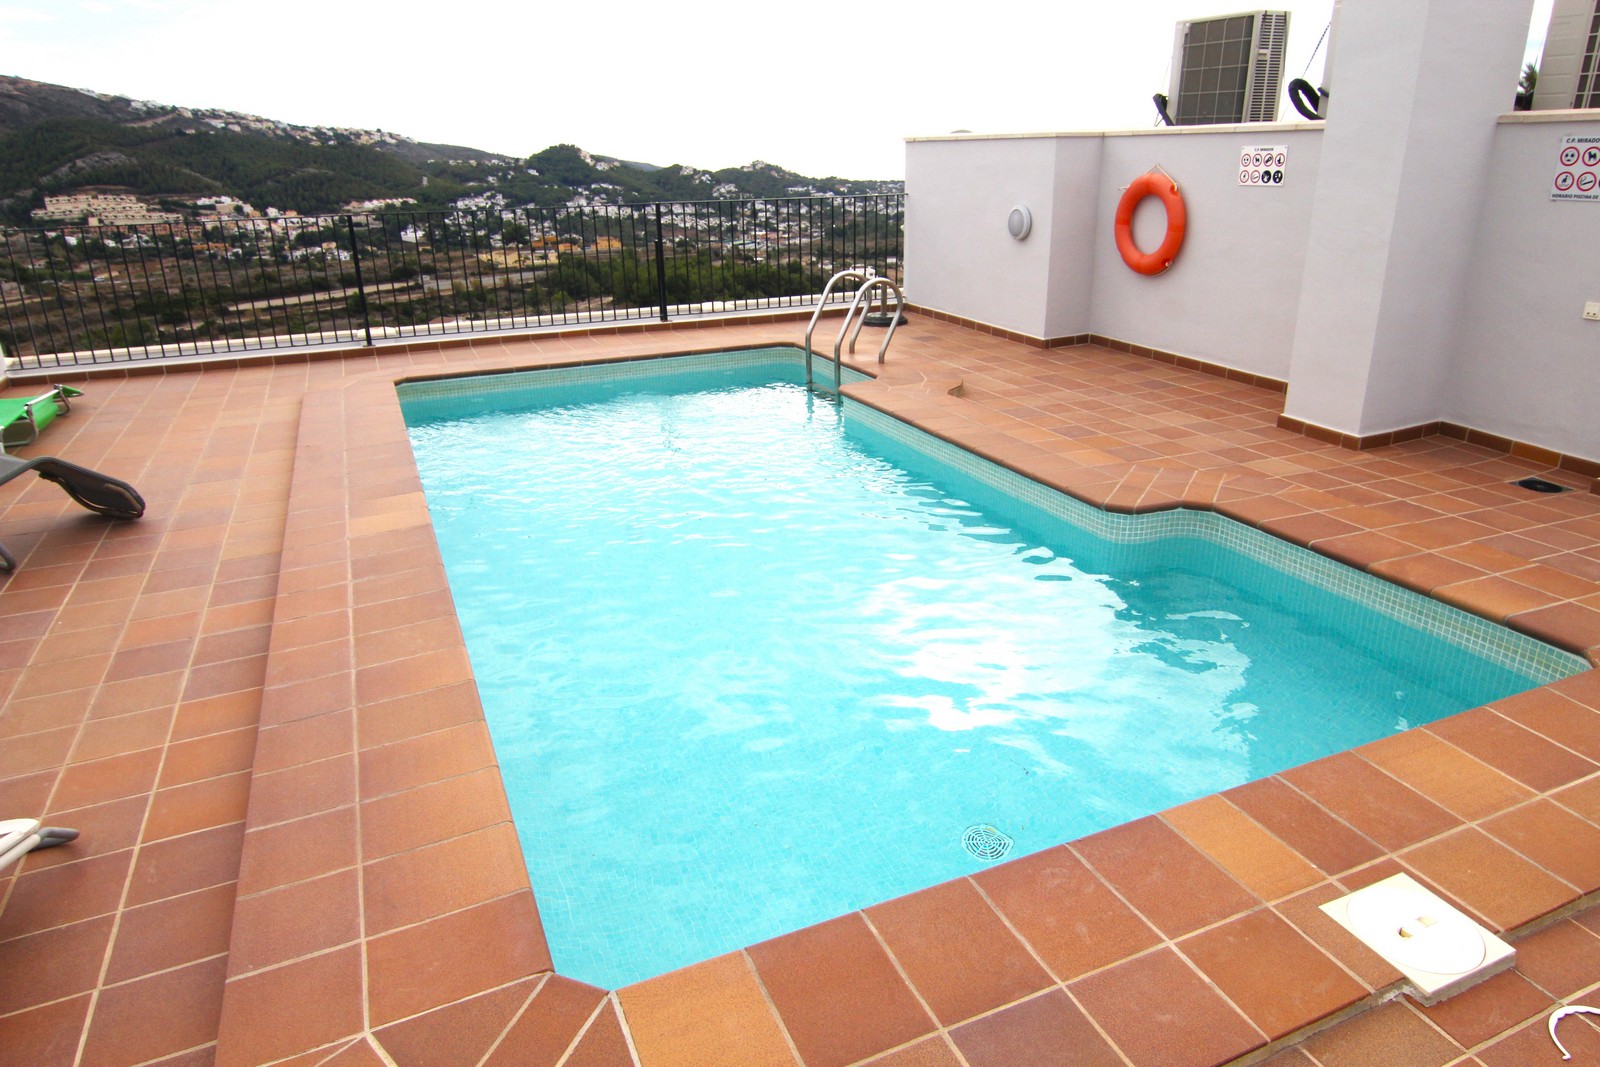 Apartment for sale with panoramic views and swimming pool.